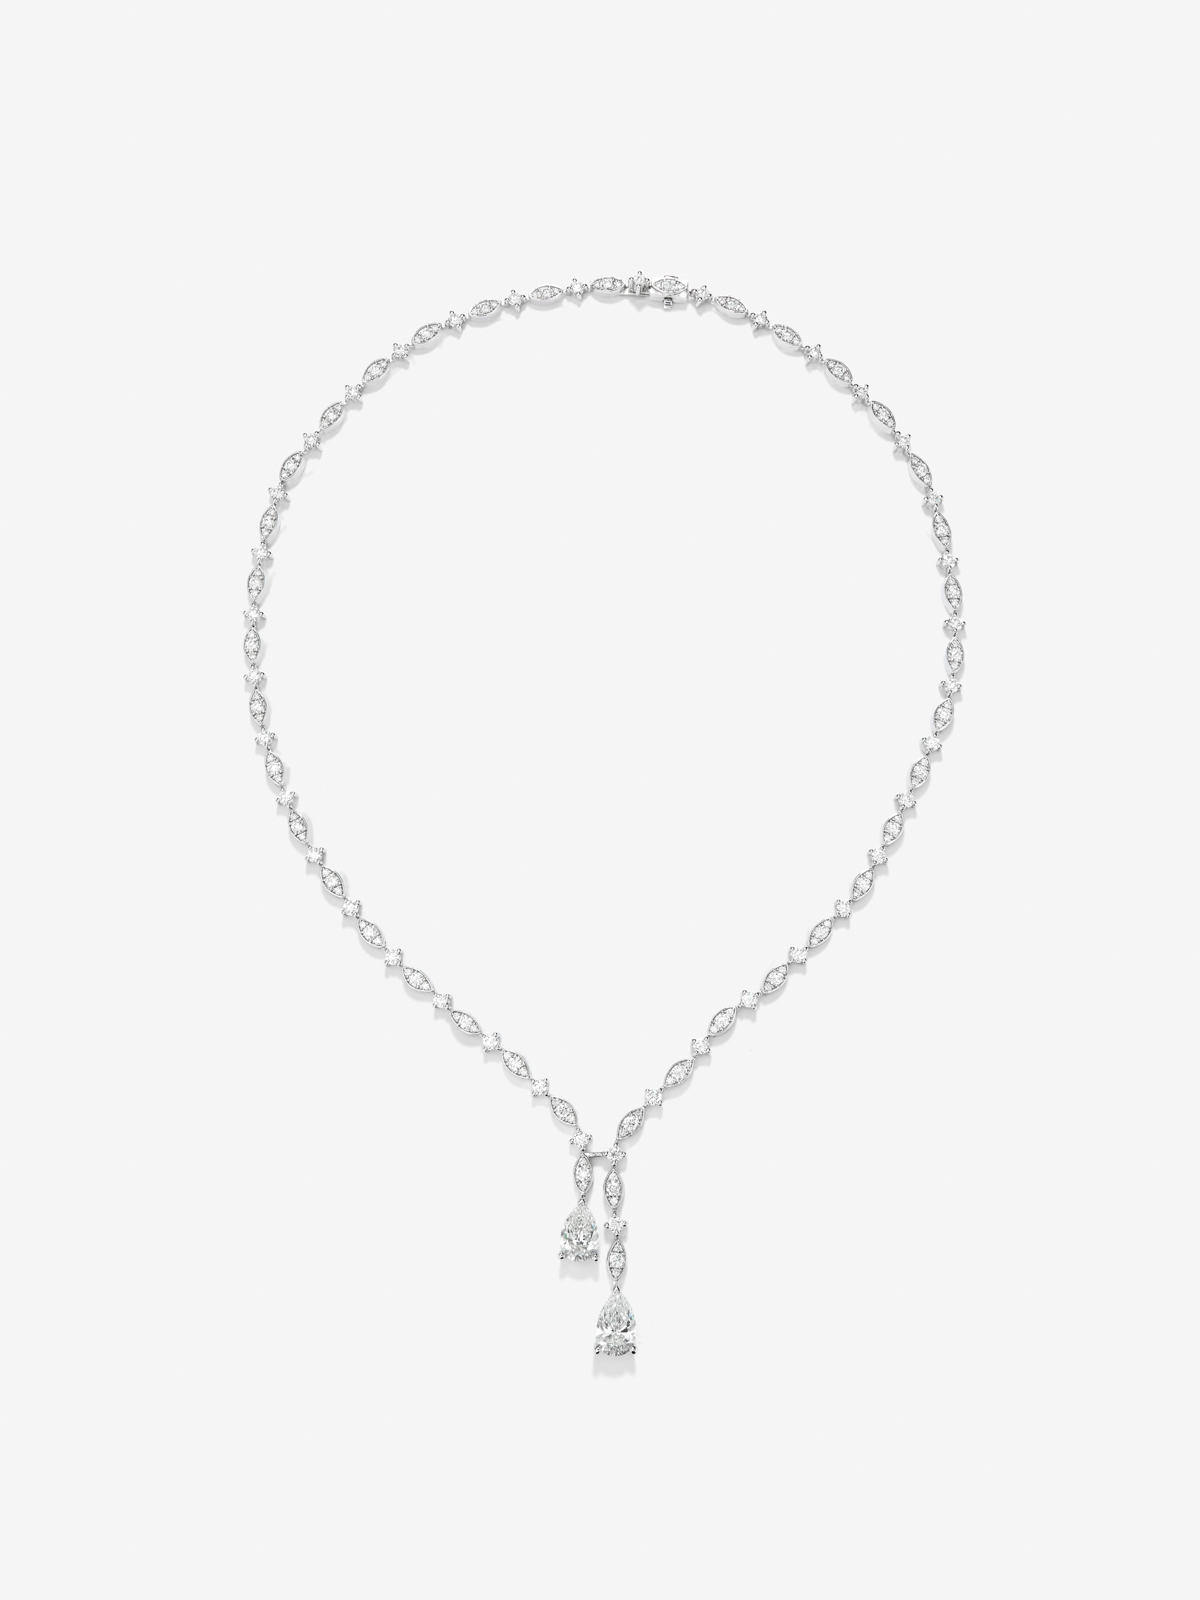 18K white gold necklace with white pear diamonds of 3.51 cts and white diamonds in bright size 6.32cts